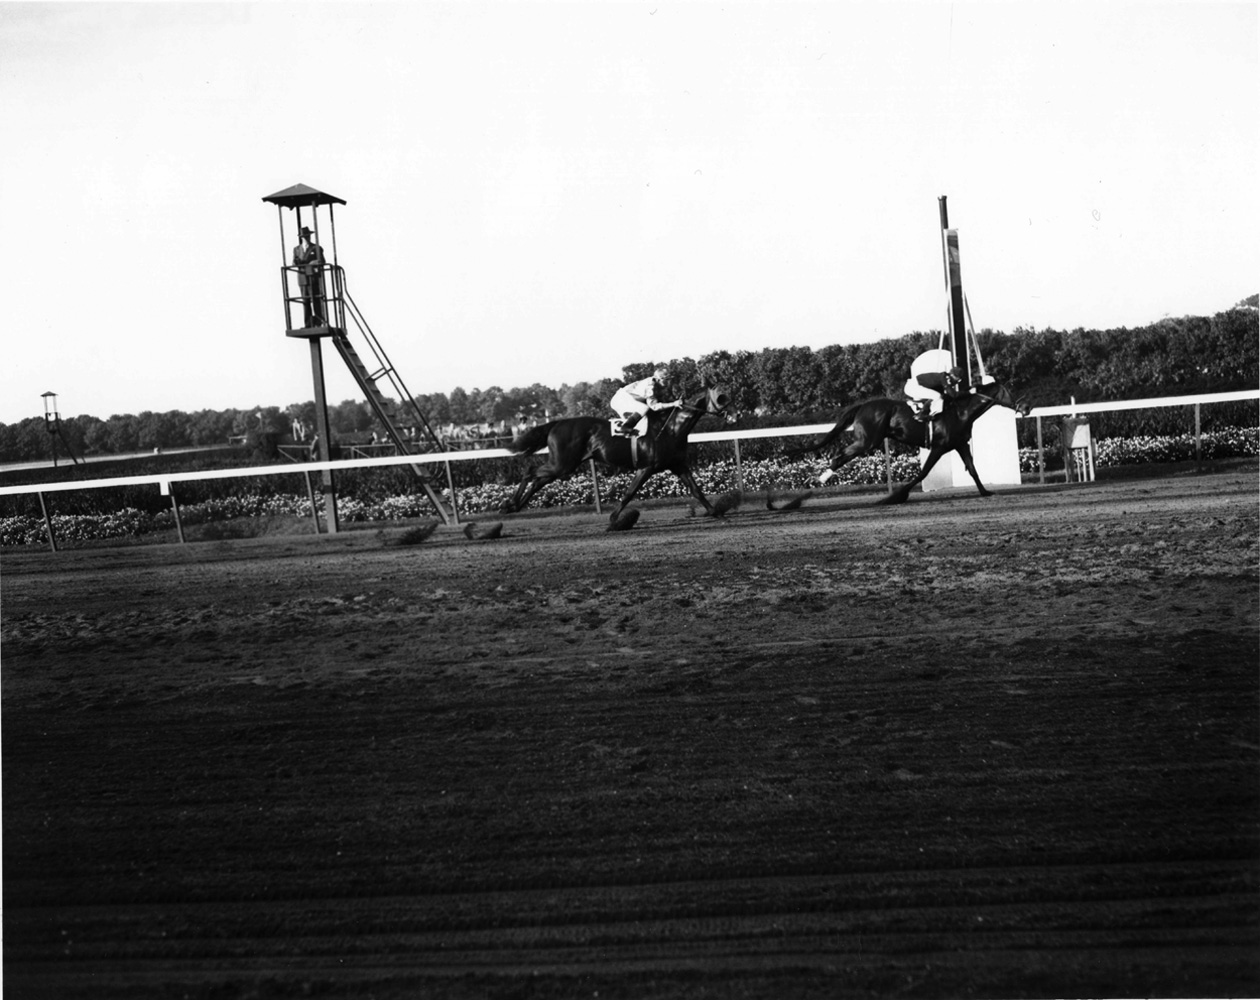 Armed (Al Snider up) winning the 1947 Sysonby Mile at Belmont Park (Keeneland Library Morgan Collection/Museum Collection)